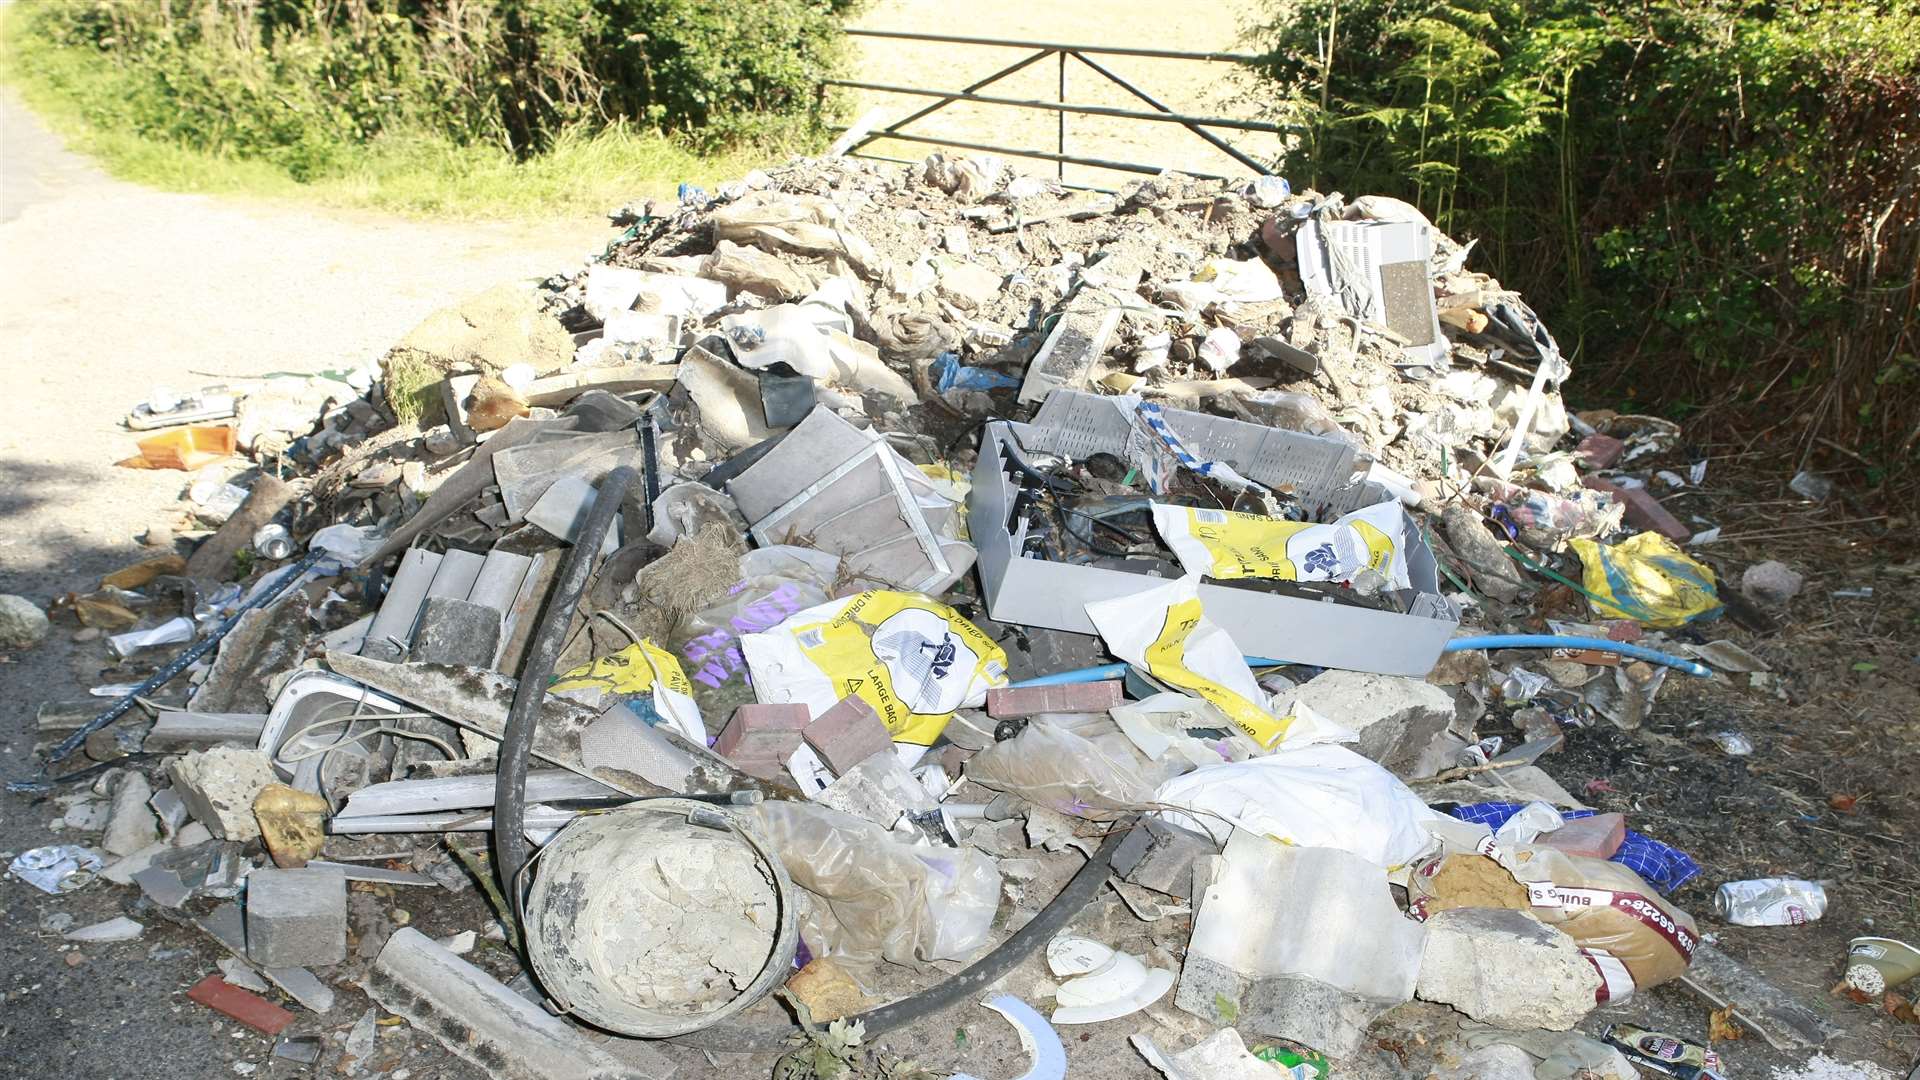 Fly tipping can be a big problem as well as being unsightly